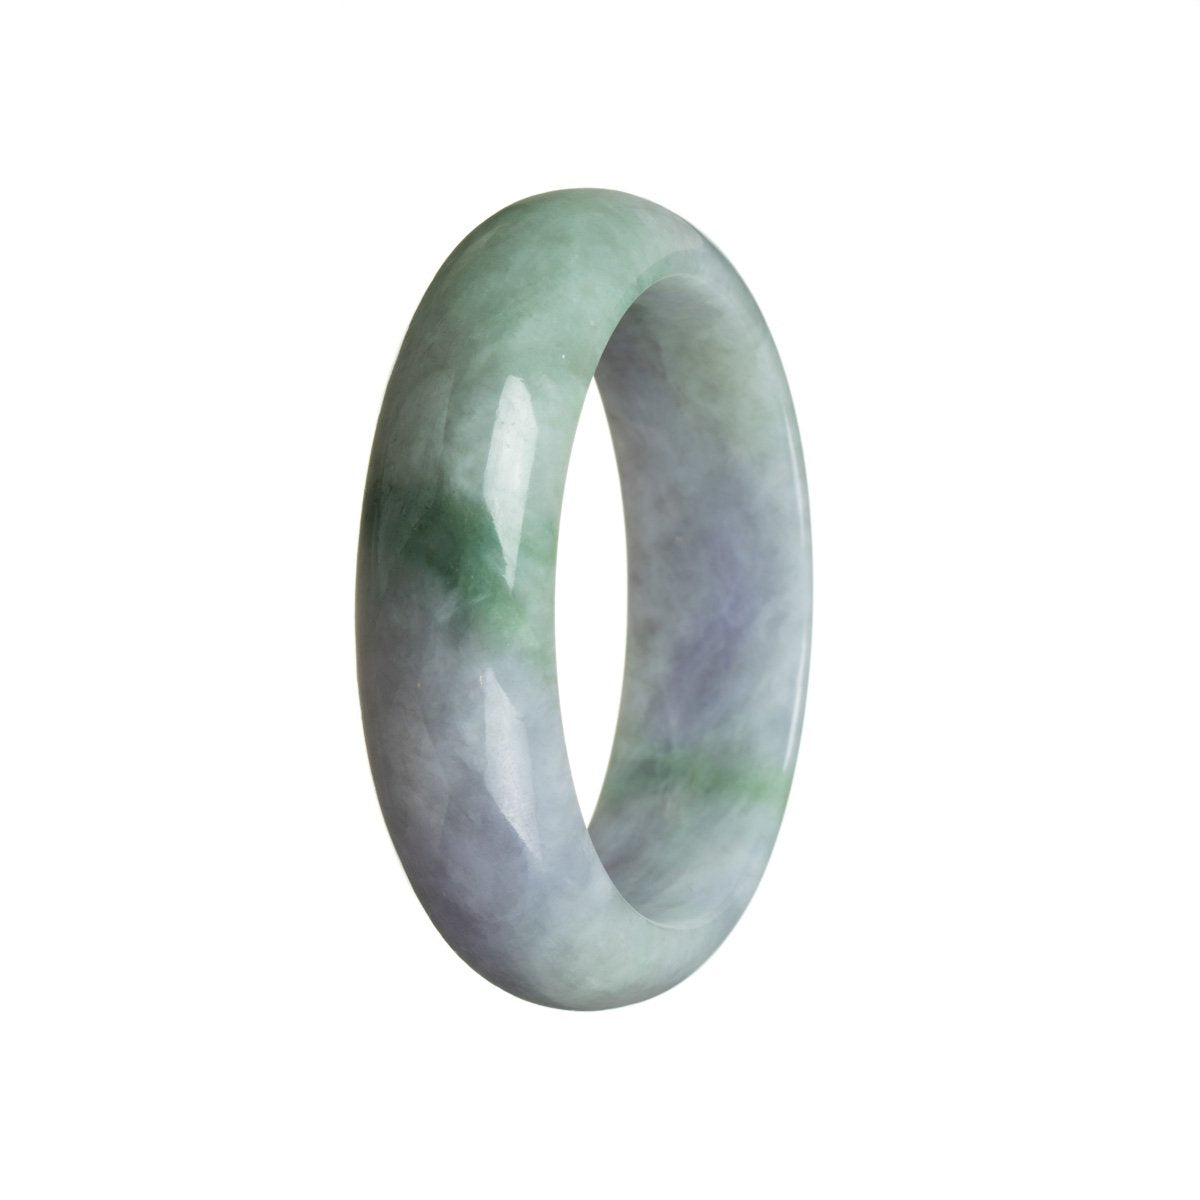 A half moon shaped traditional jade bangle bracelet with real natural lavender and green hues. Perfect for adding a touch of elegance to any outfit.